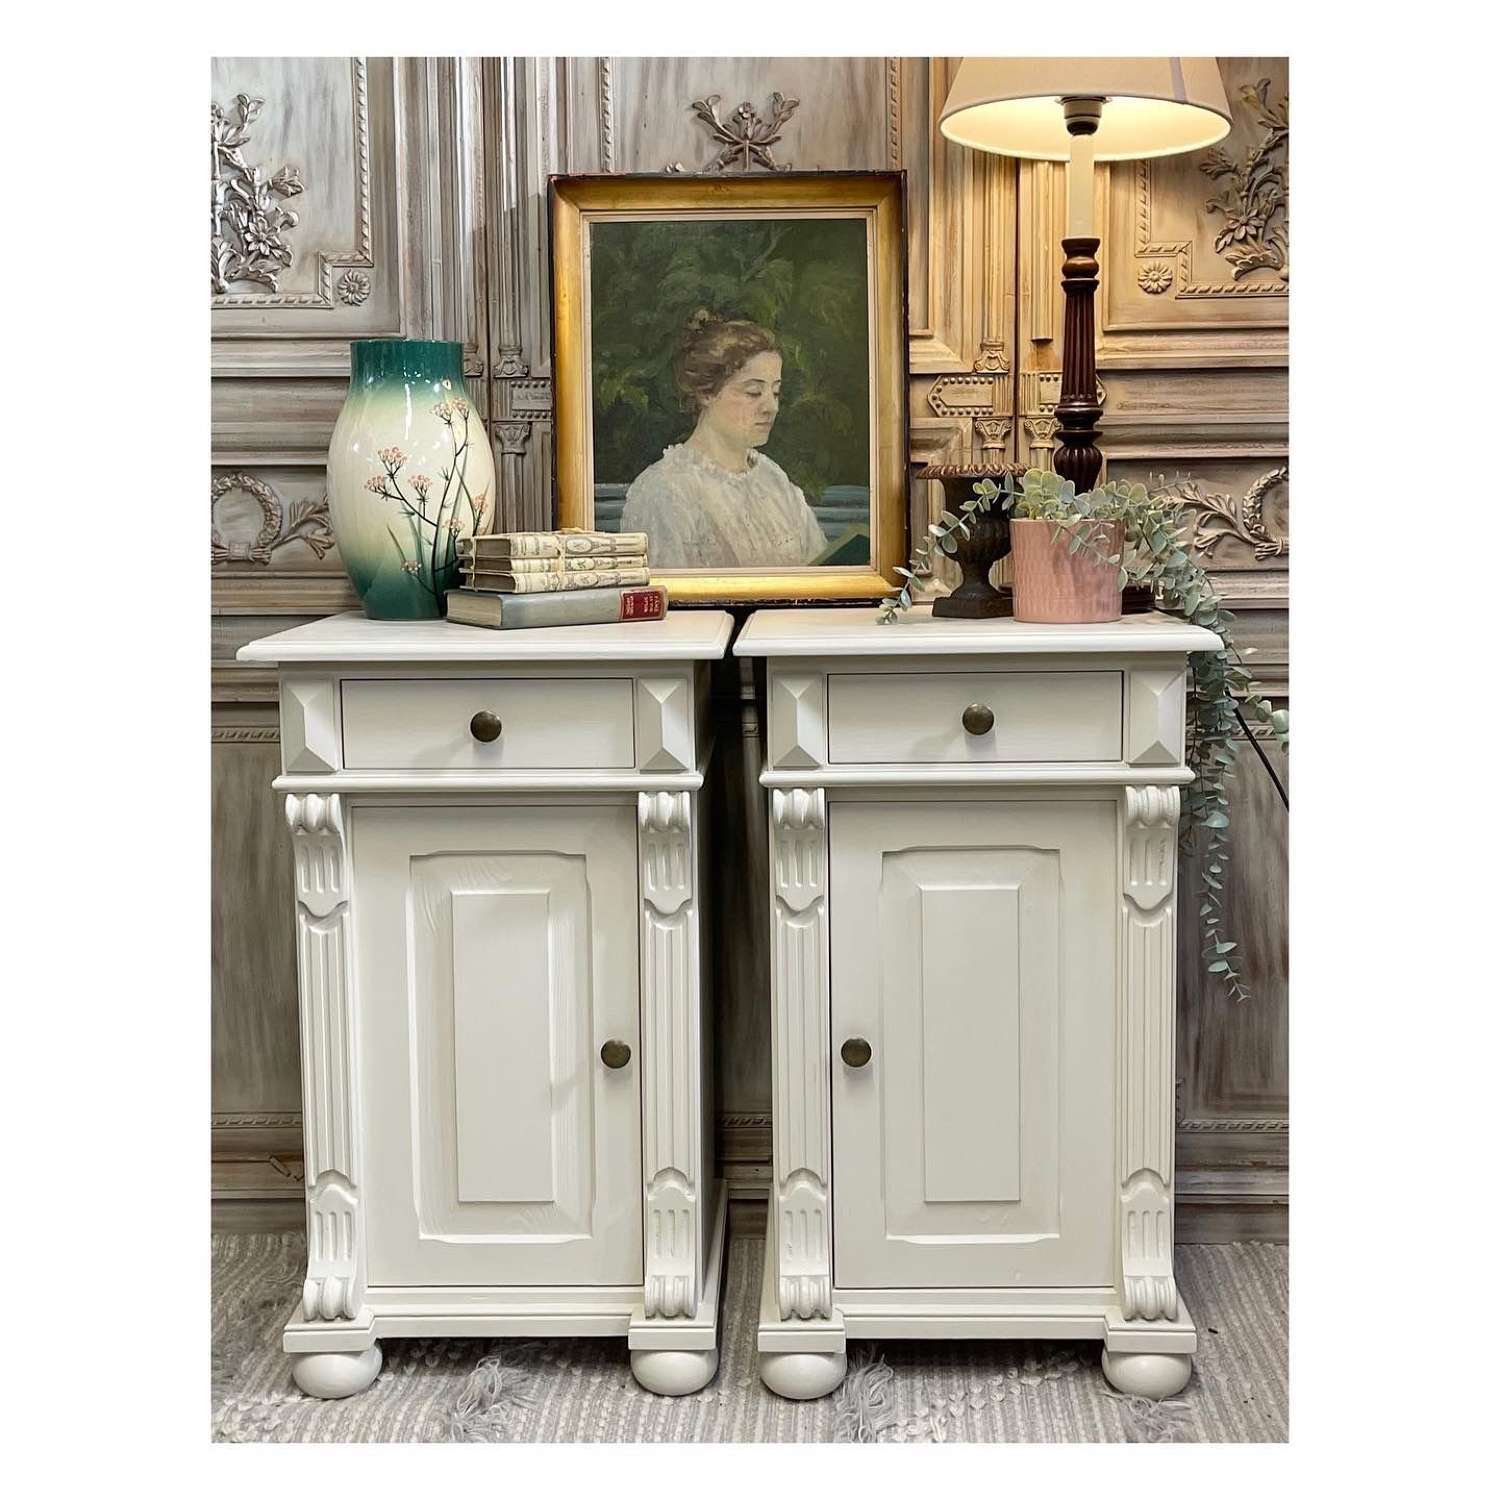 Pair of Painted French Country Pine Bedside Cabinets